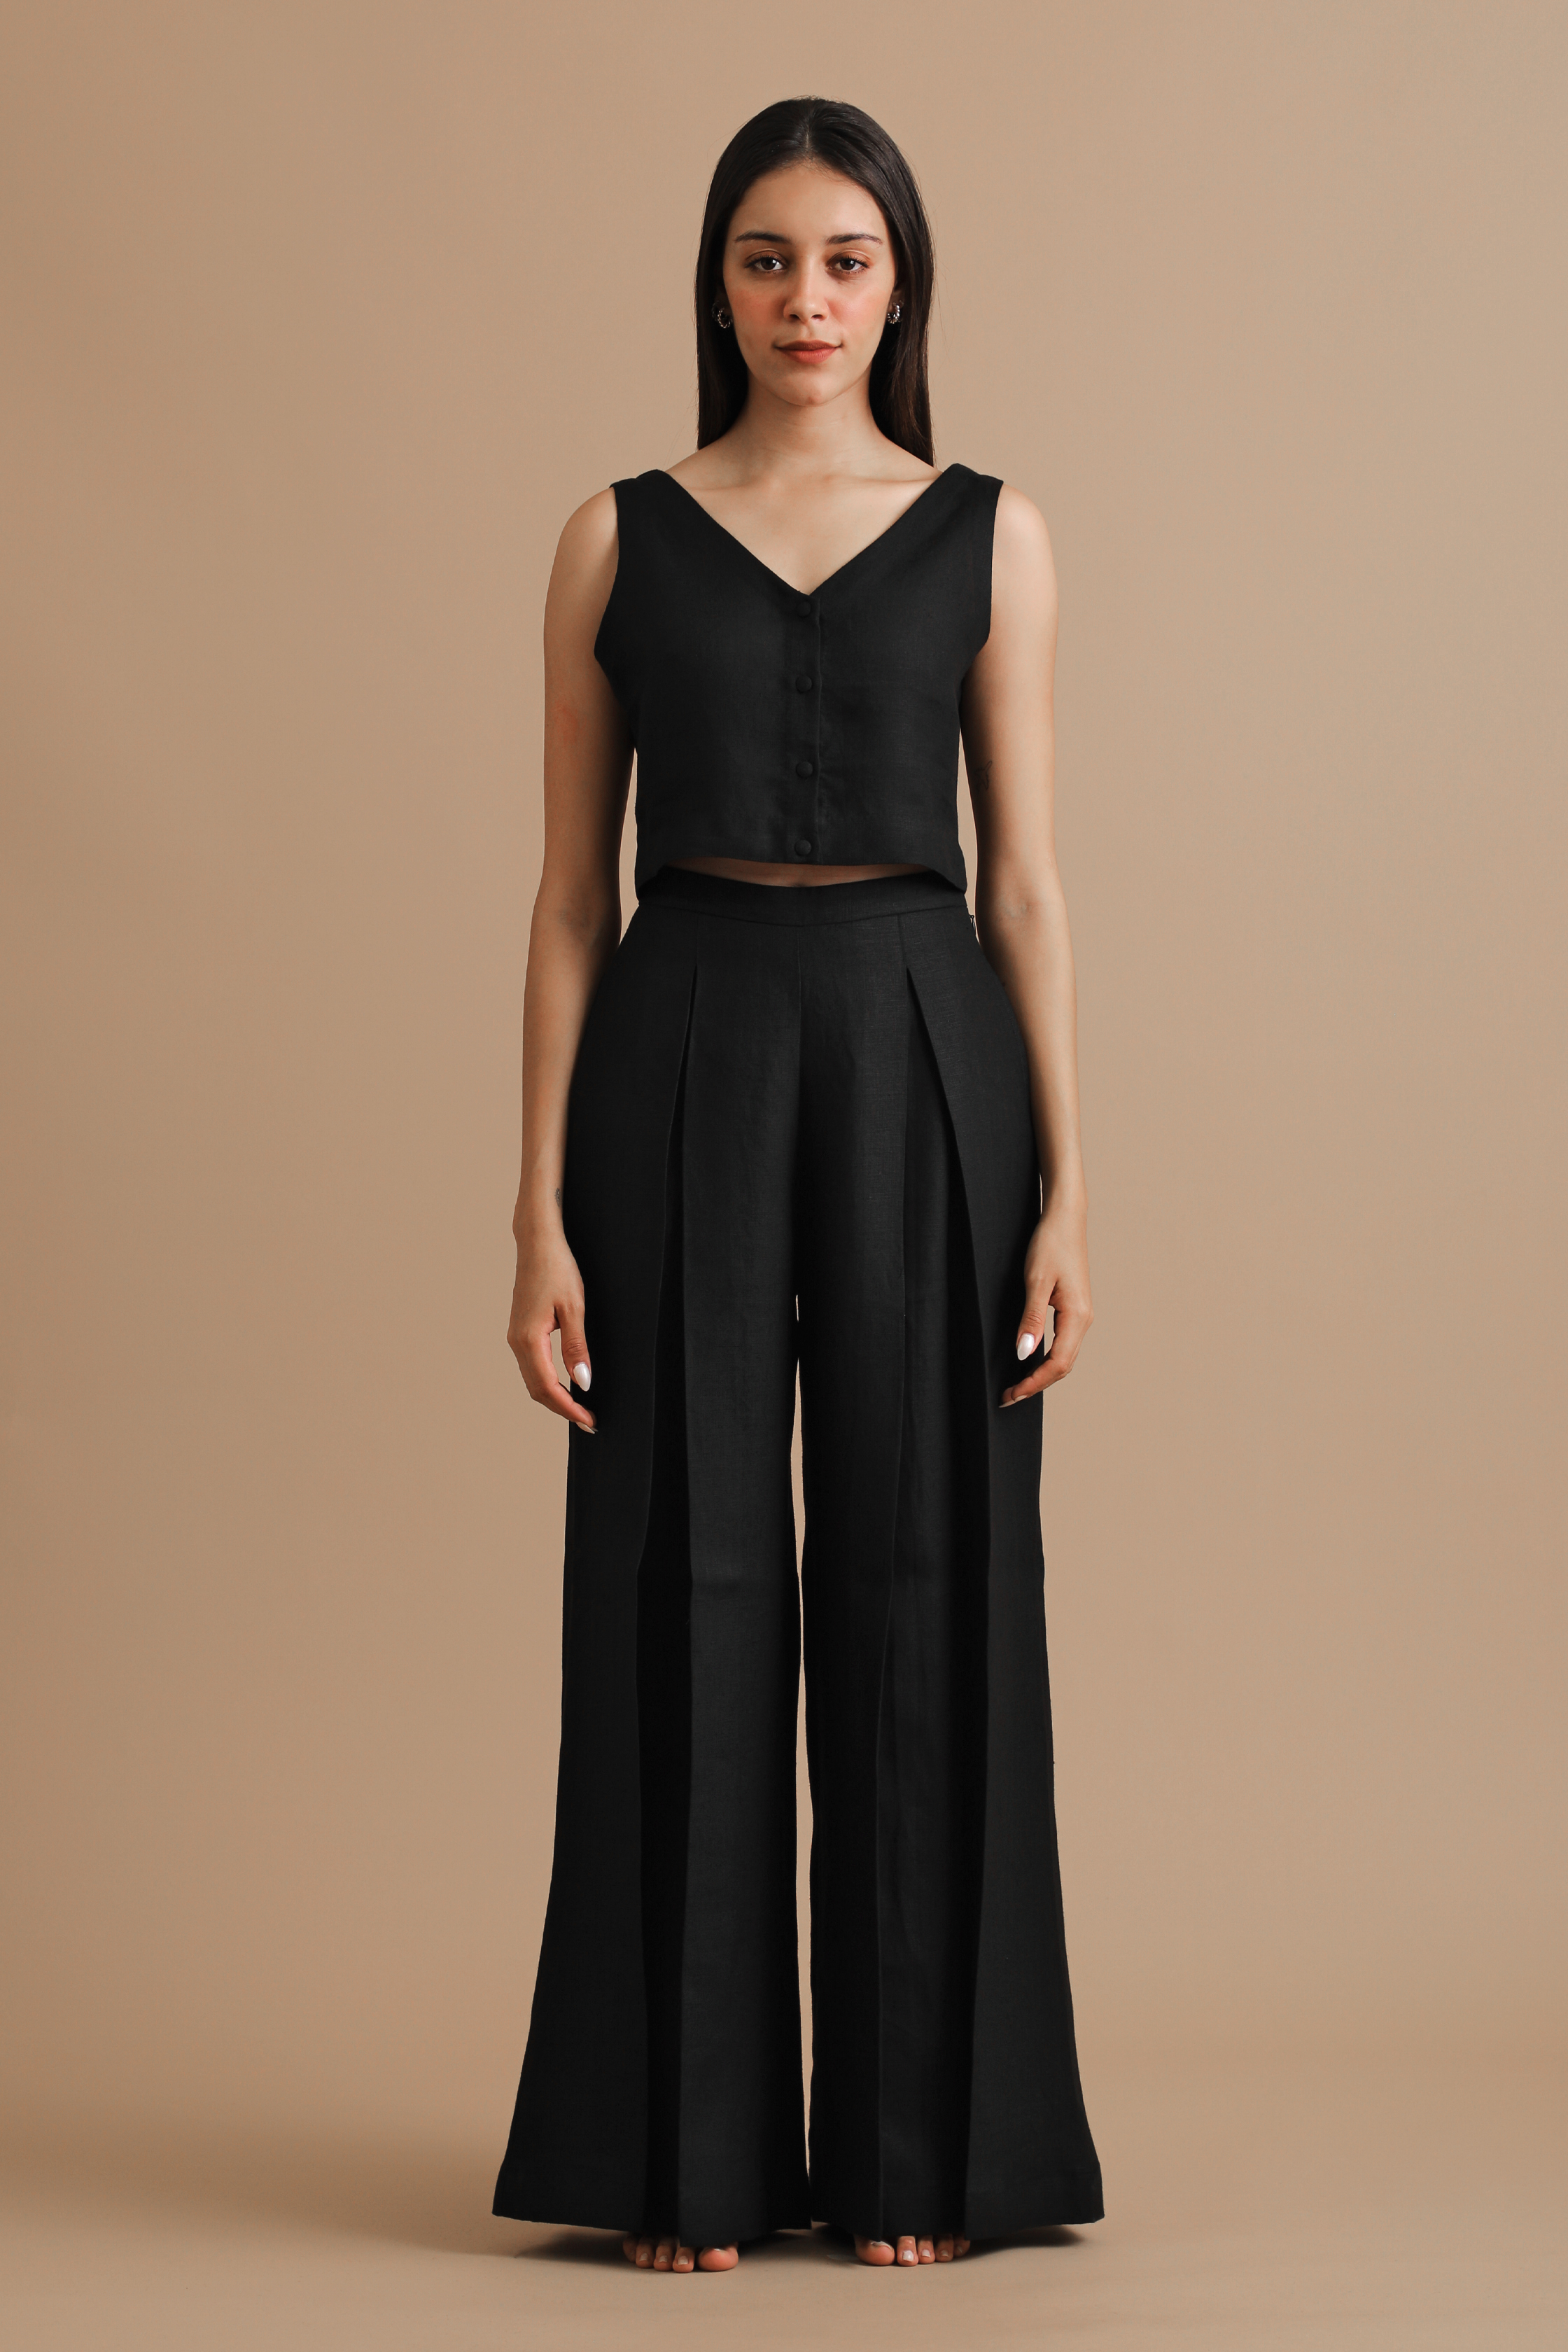 Buy Black Solid Palazzos Online - W for Woman